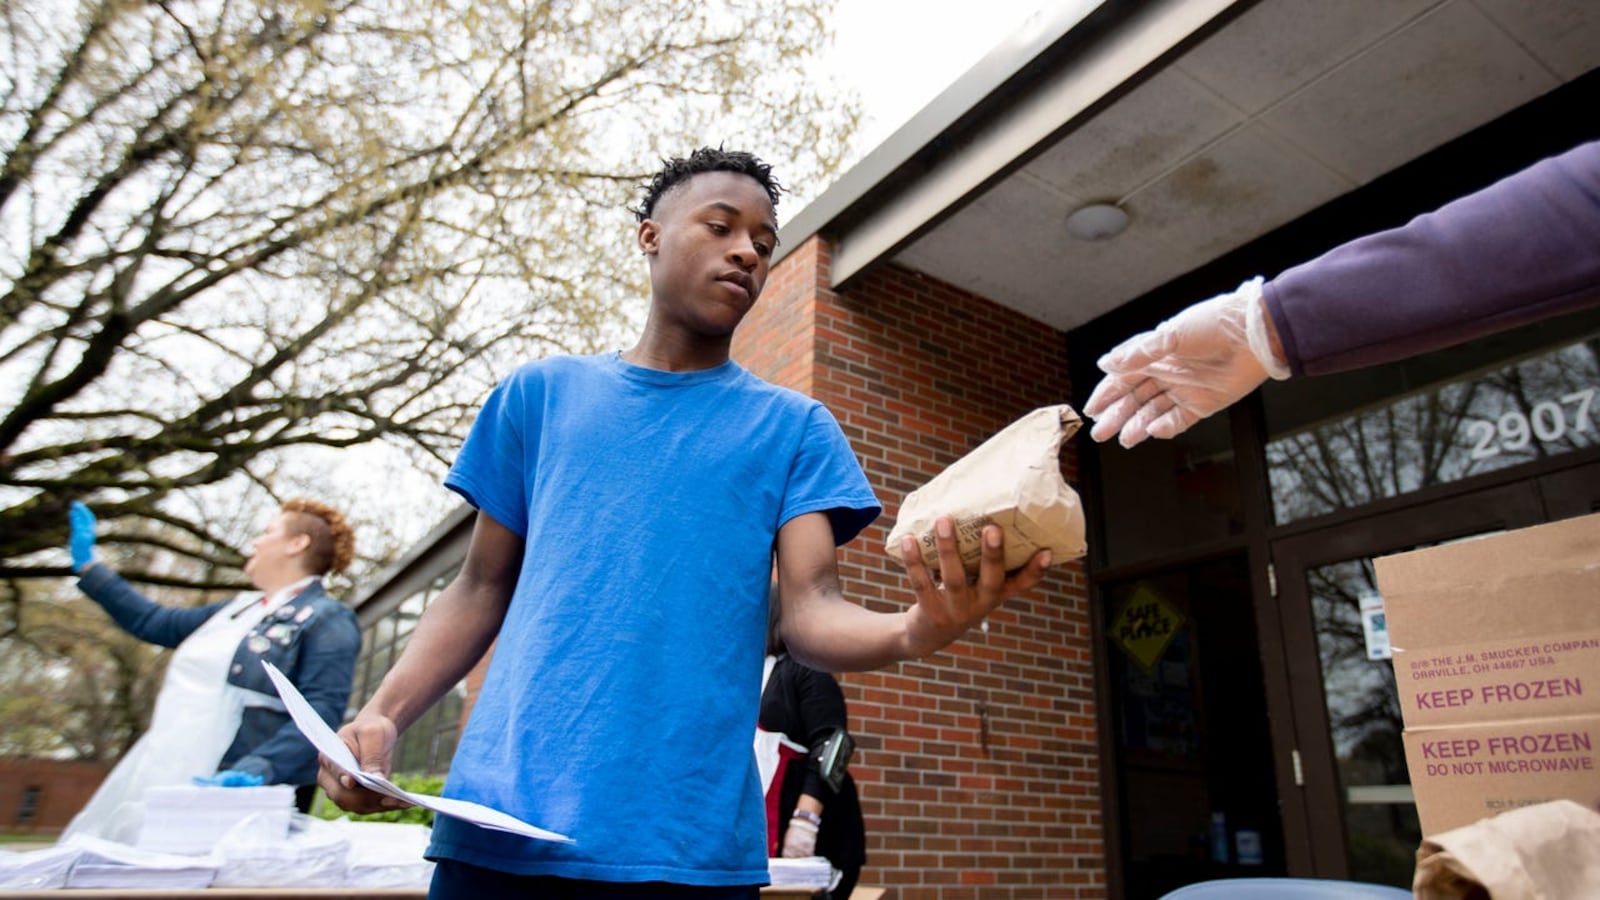 Ruby Buckner (right) of the YMCA of Memphis and the Mid-South hands a lunch to Demarius Hurd, 17, at Ed Rice Community Center in Memphis.